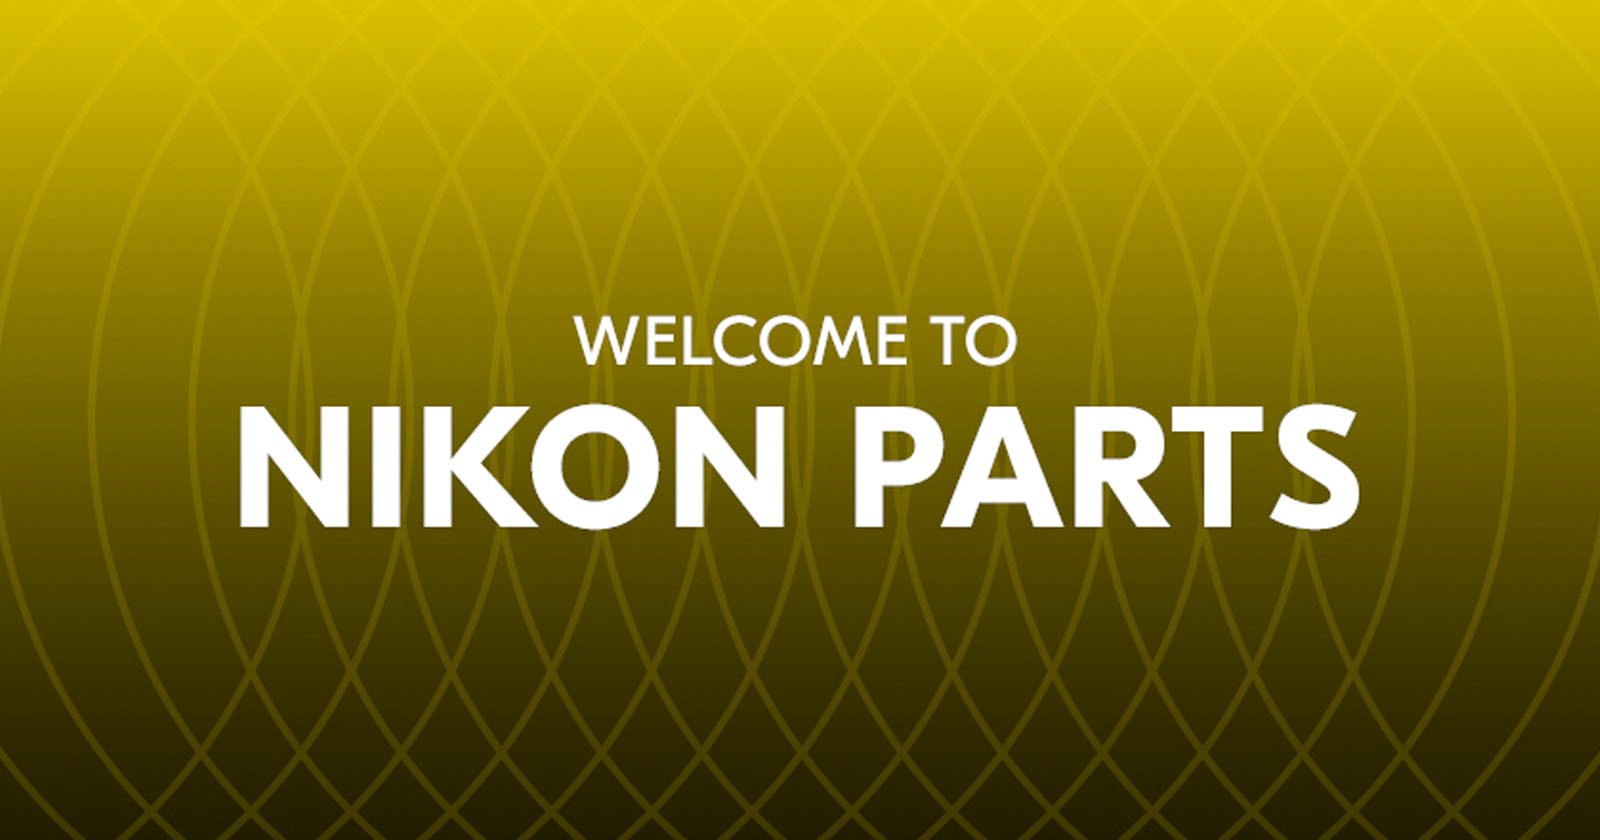 Nikon Launches New Self-Service Repair Program for Select Products